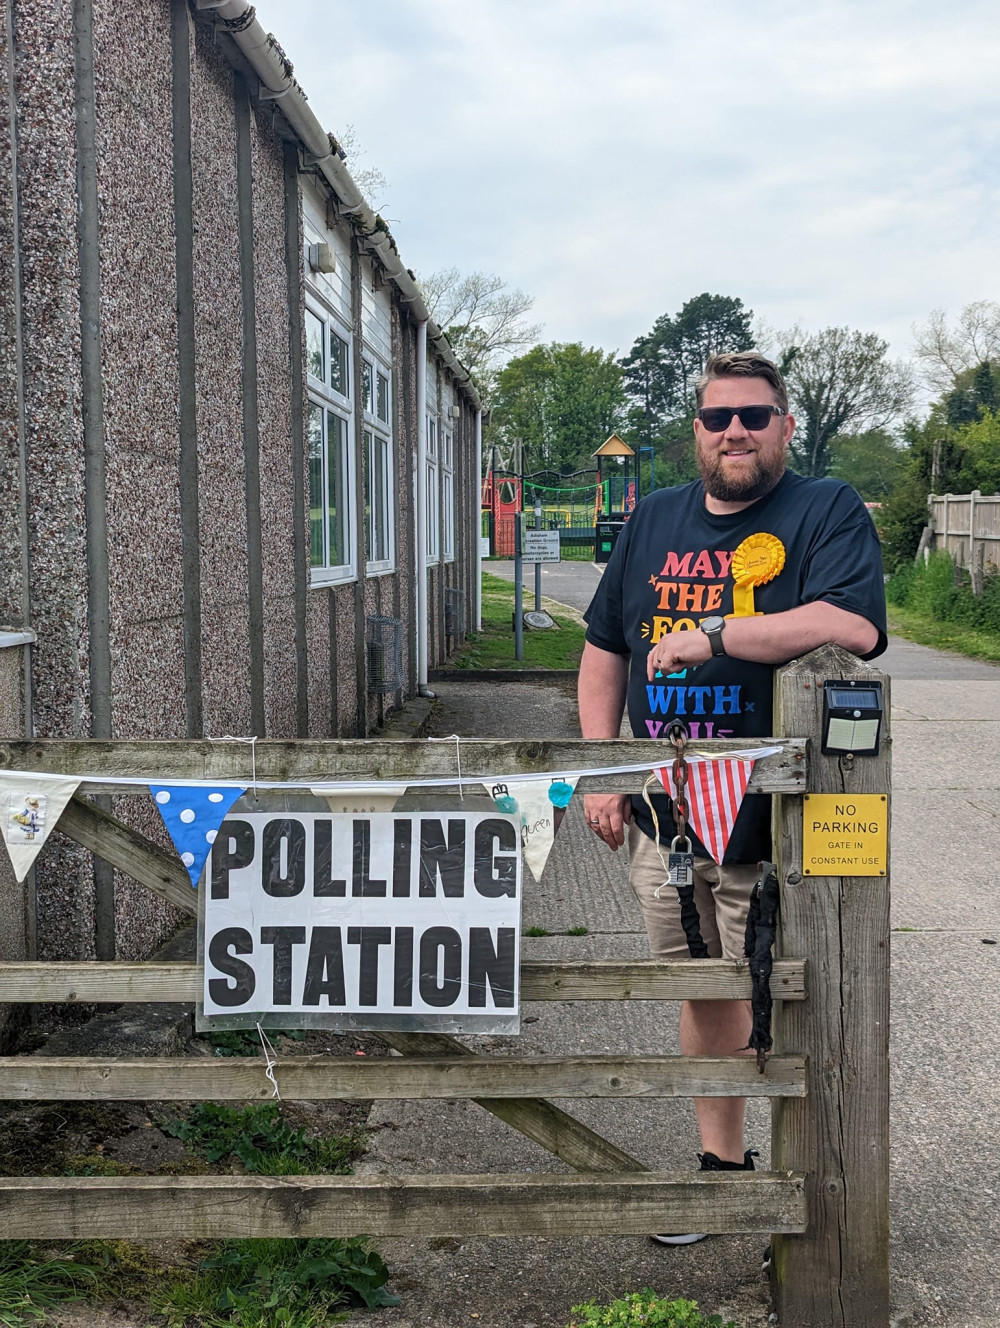 Lib Dem candidate Lee Castle wearing a rosette, standing next to polling station sign outside the village hall.